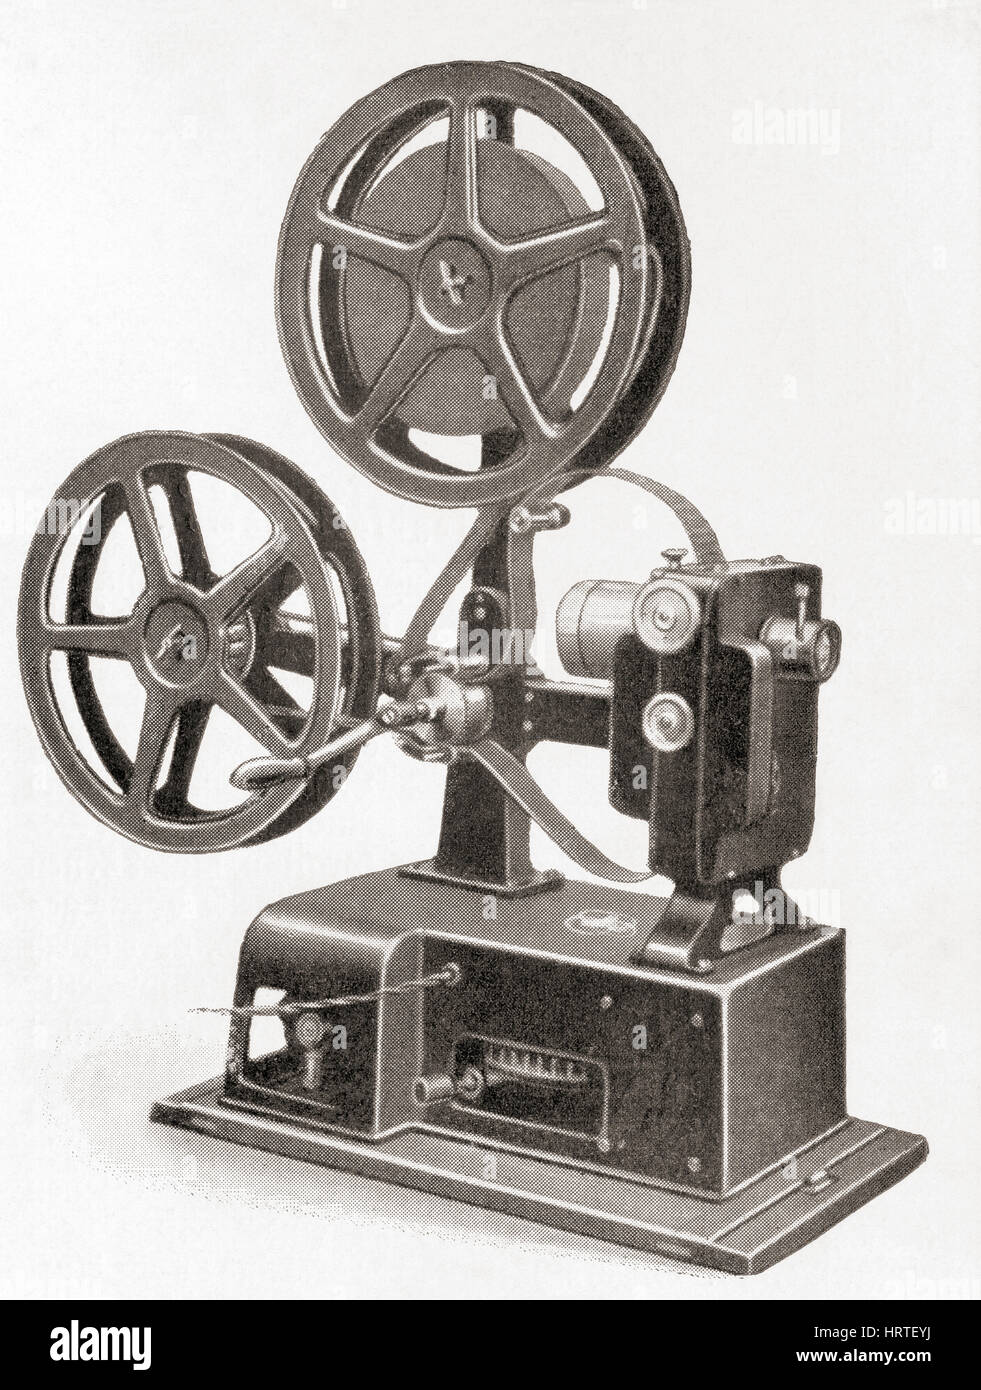 Krupp-Ernemann Kinox II, 35mm Film Projector with hand crank, c.1919.  From Meyers Lexicon, published 1927. Stock Photo